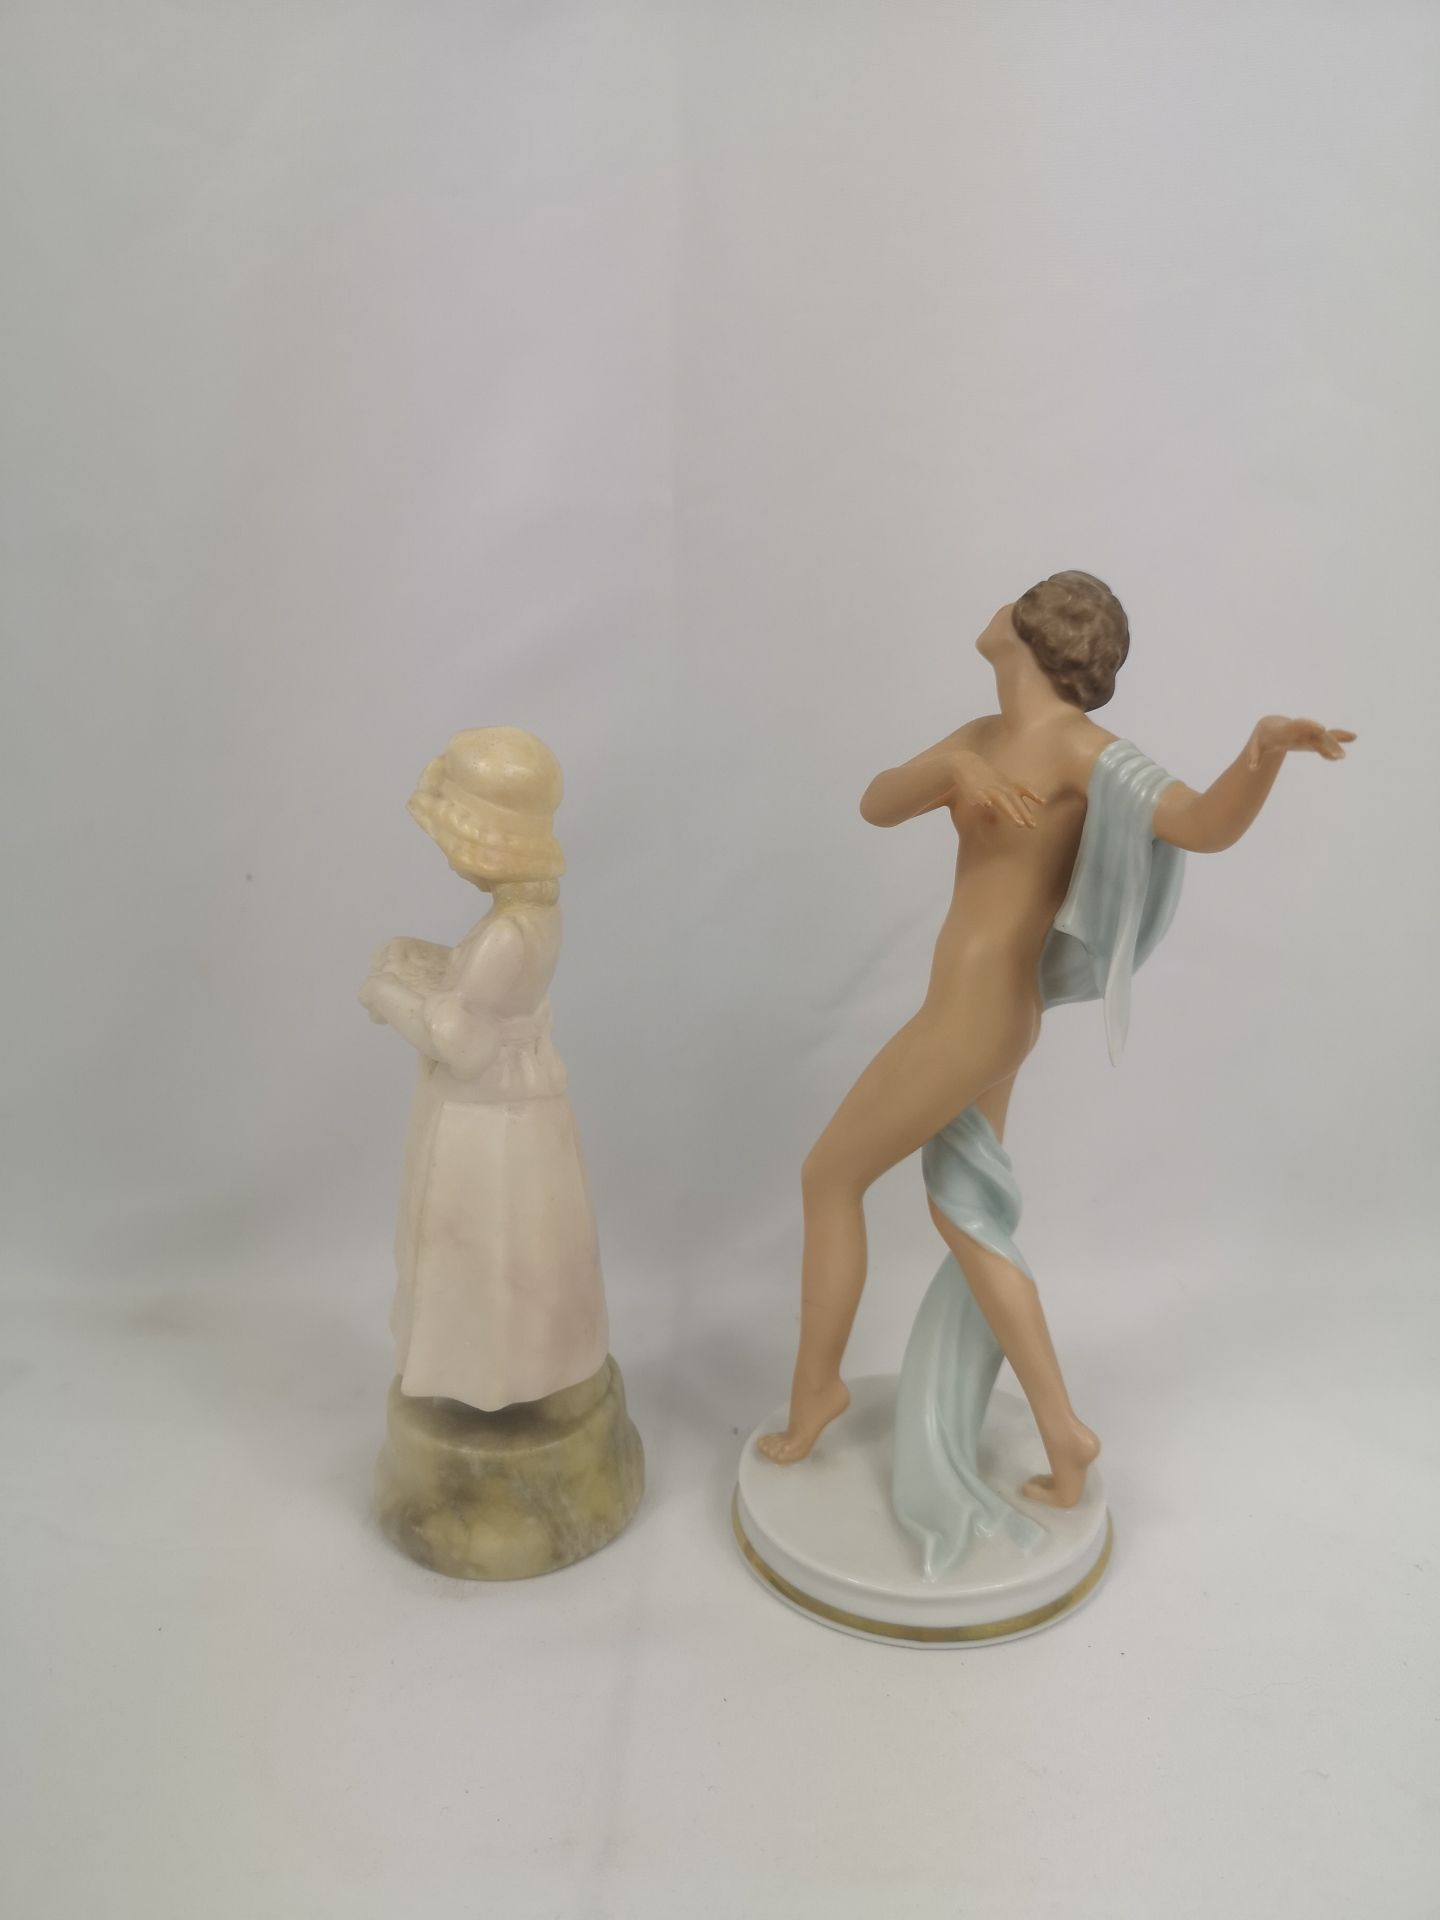 Art deco style Rosenthal figurine together with a Goldscheider figurine - Image 2 of 6